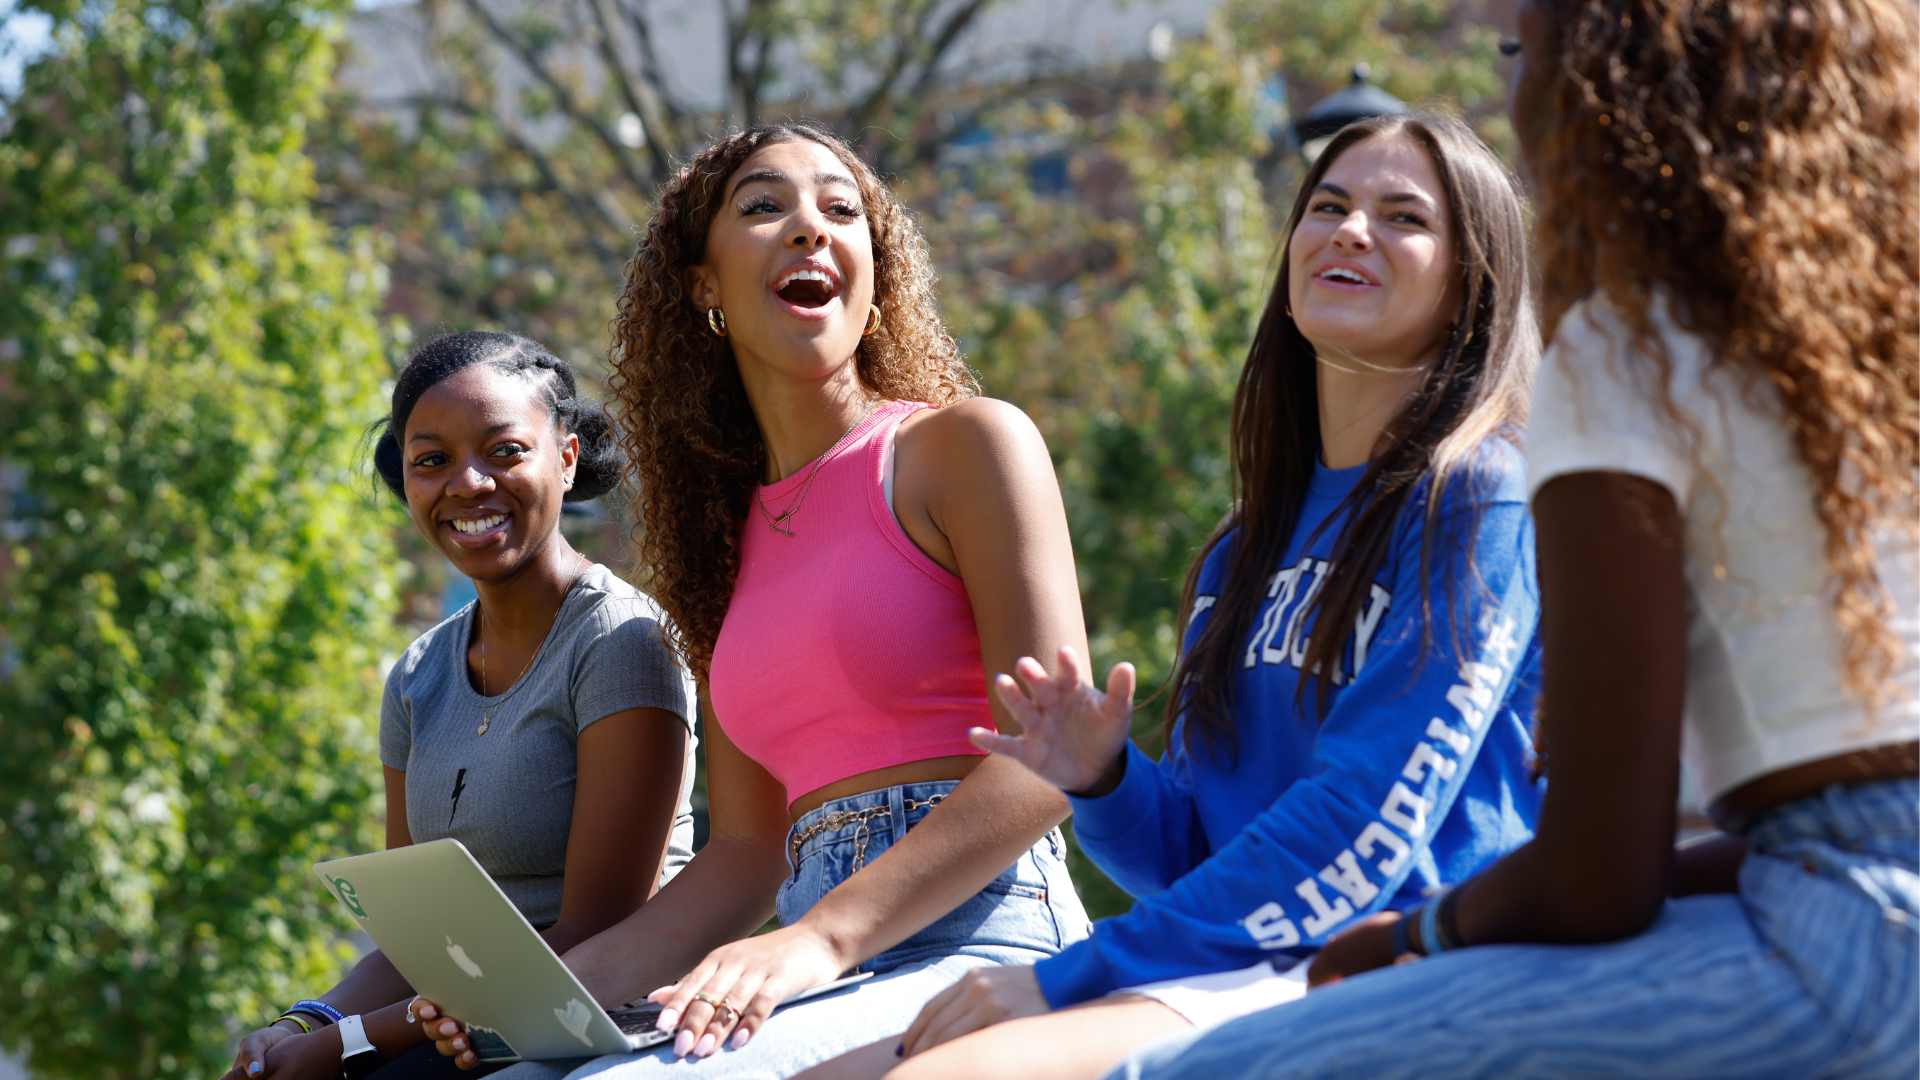 4 women sitting and laughing on campus bench, one holding a laptop